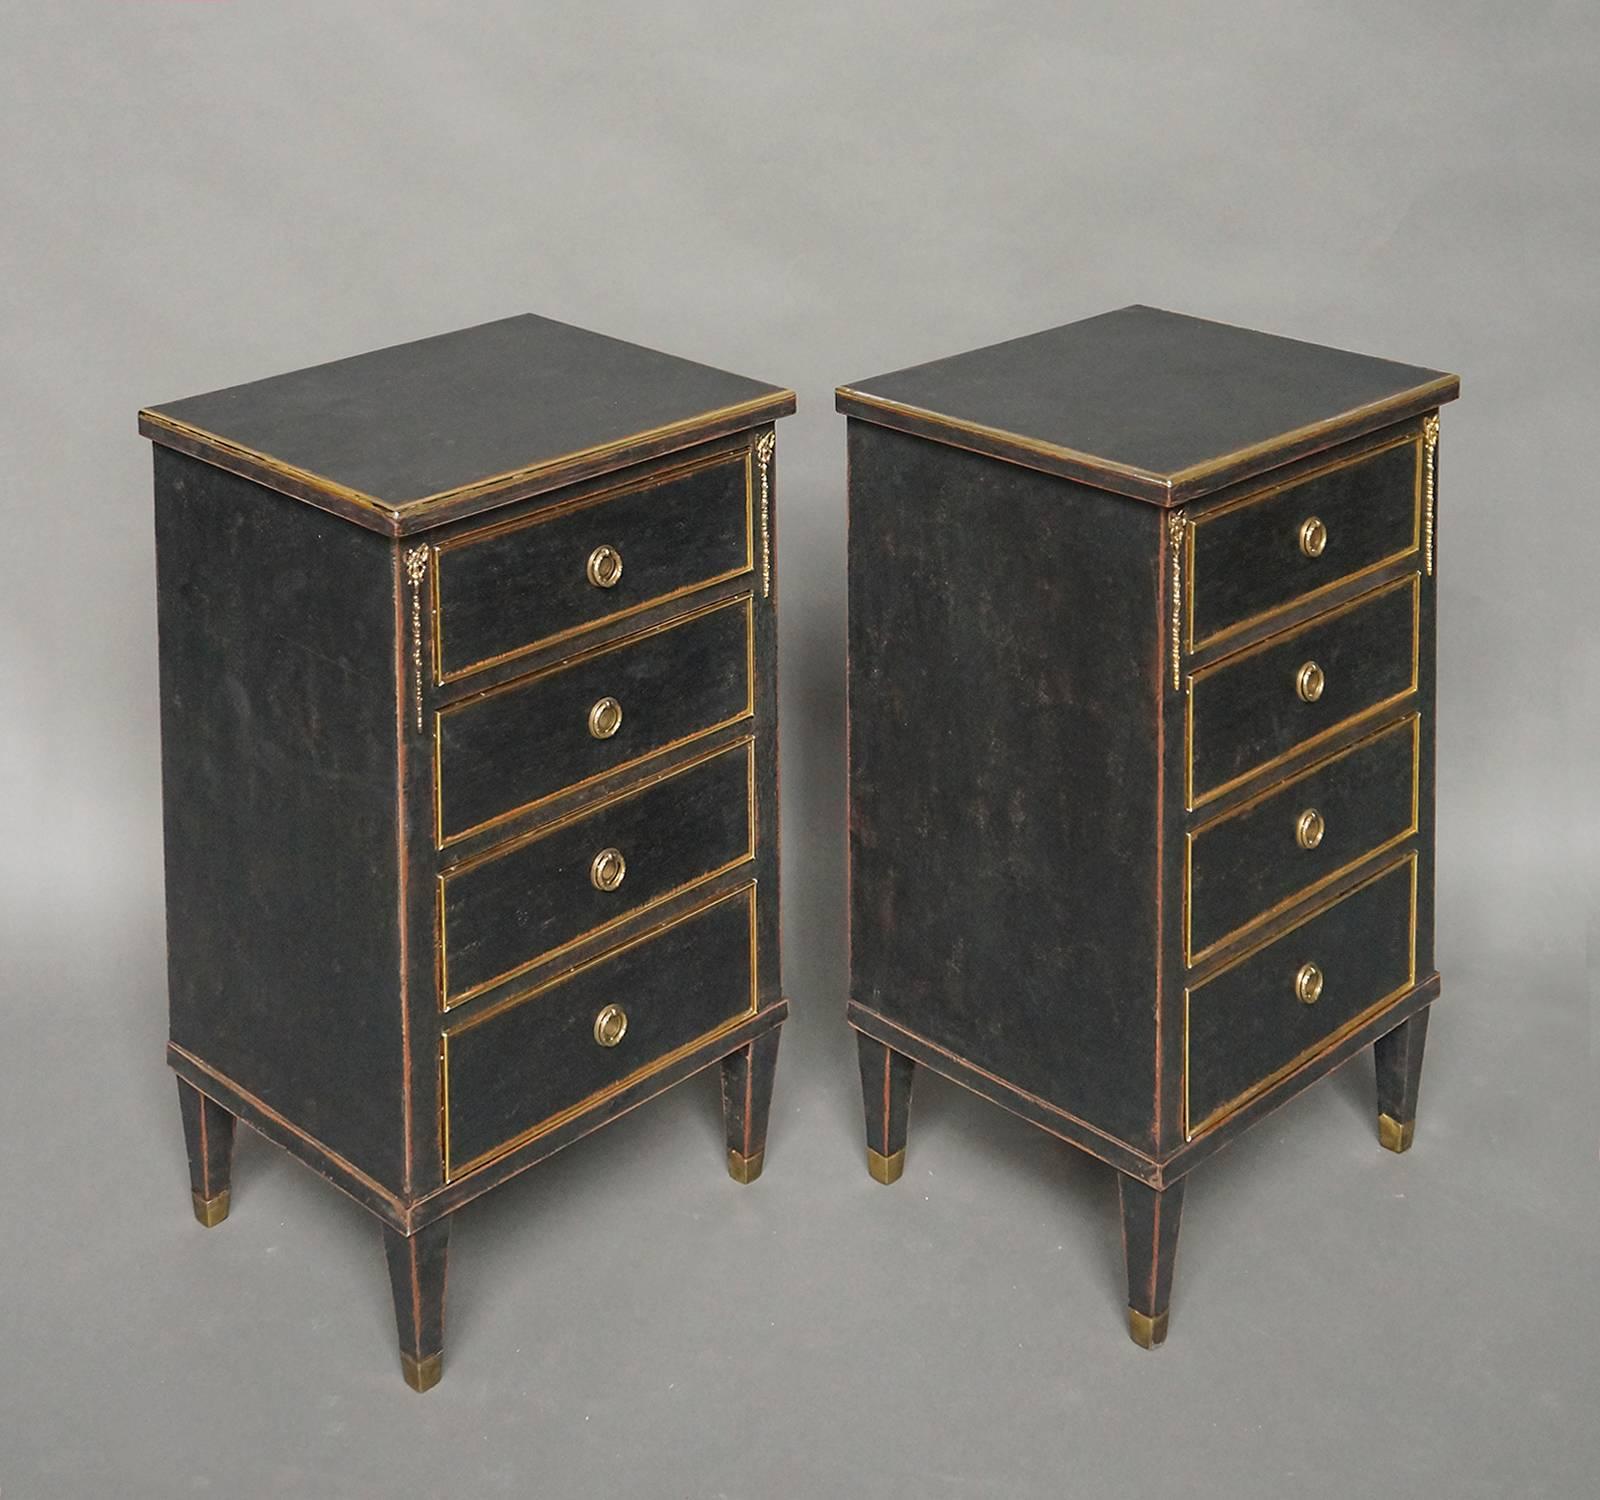 Pair of small Swedish four-drawer commodes, circa 1900, with the feet, the tops and the drawer edges cased in brass. At the upper corners are applied brass bows. These commodes would work well as nightstands.